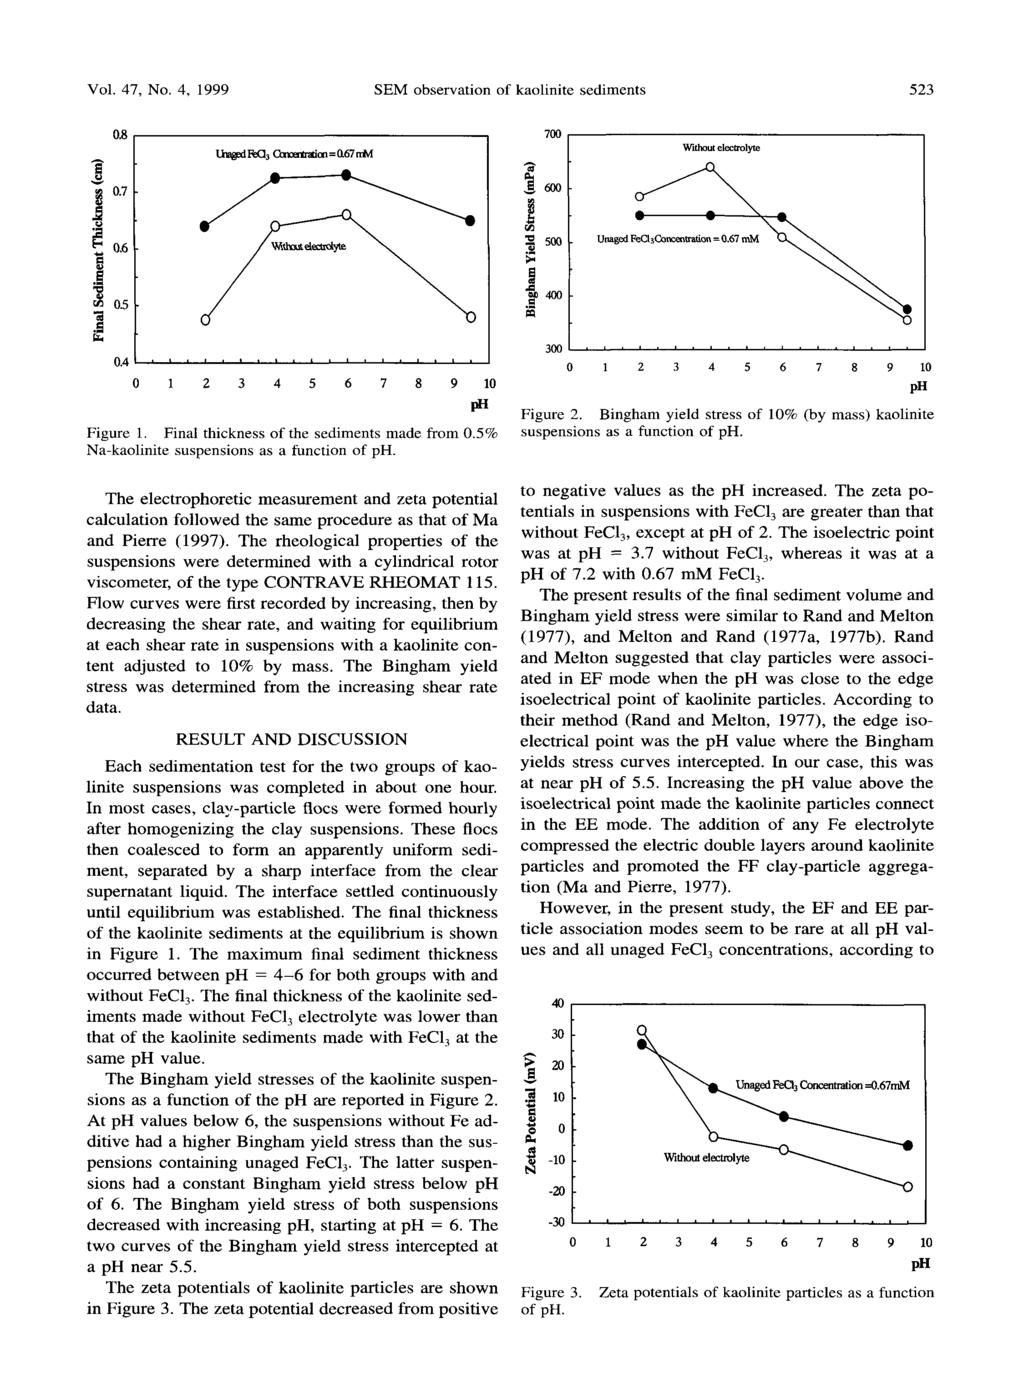 Vol. 47, No. 4, 1999 SEM observation of kaolinite sediments 523! ~.7 Lhaged FeO 3 Ccmmlratlon =.67 ram Without electrolyte \ a,. Llnaged FeO~Cow.oa,a-ation =.67 mm x ~ {.5 r~.